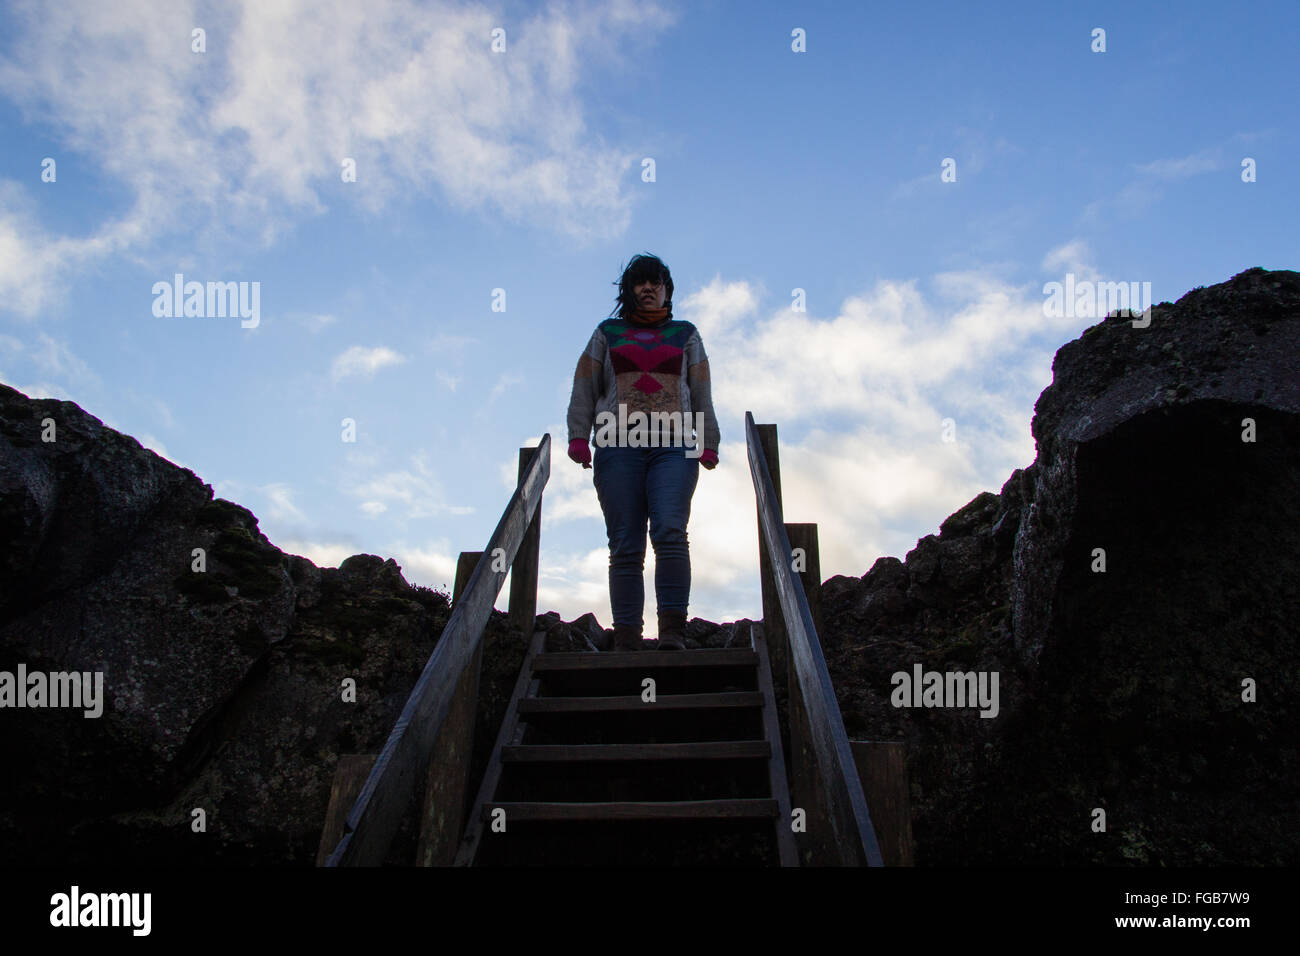 A woman waiting on the entrance of a lava tube in Iceland, near the Blue Lagoon Stock Photo